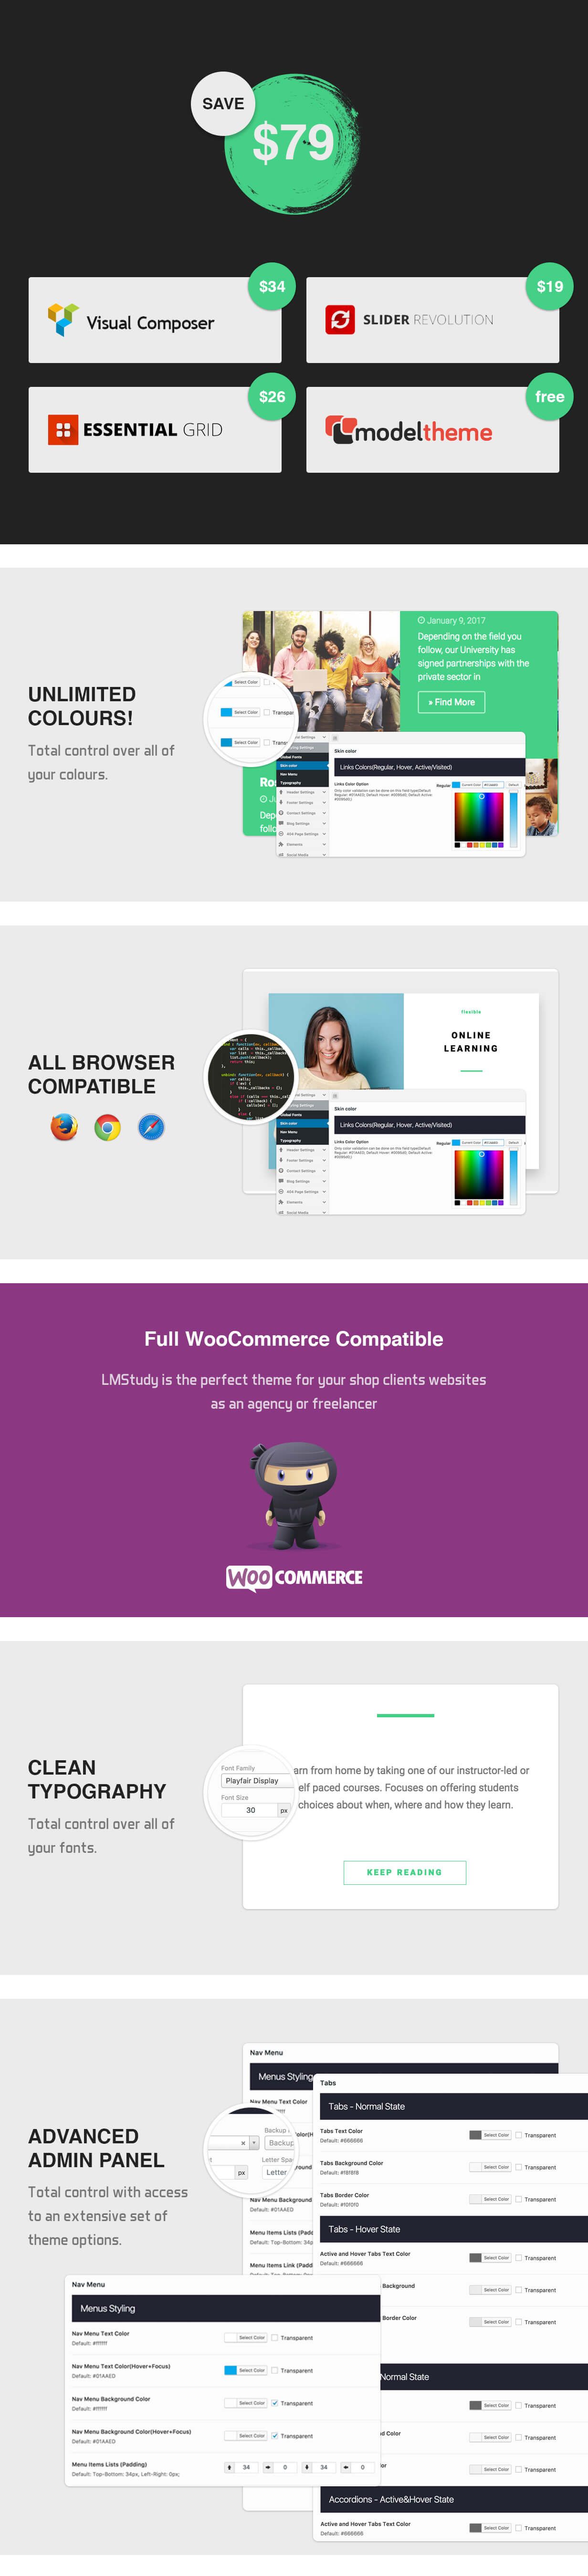 LMStudy - Course / Learning / Education LMS WooCommerce Theme - 6